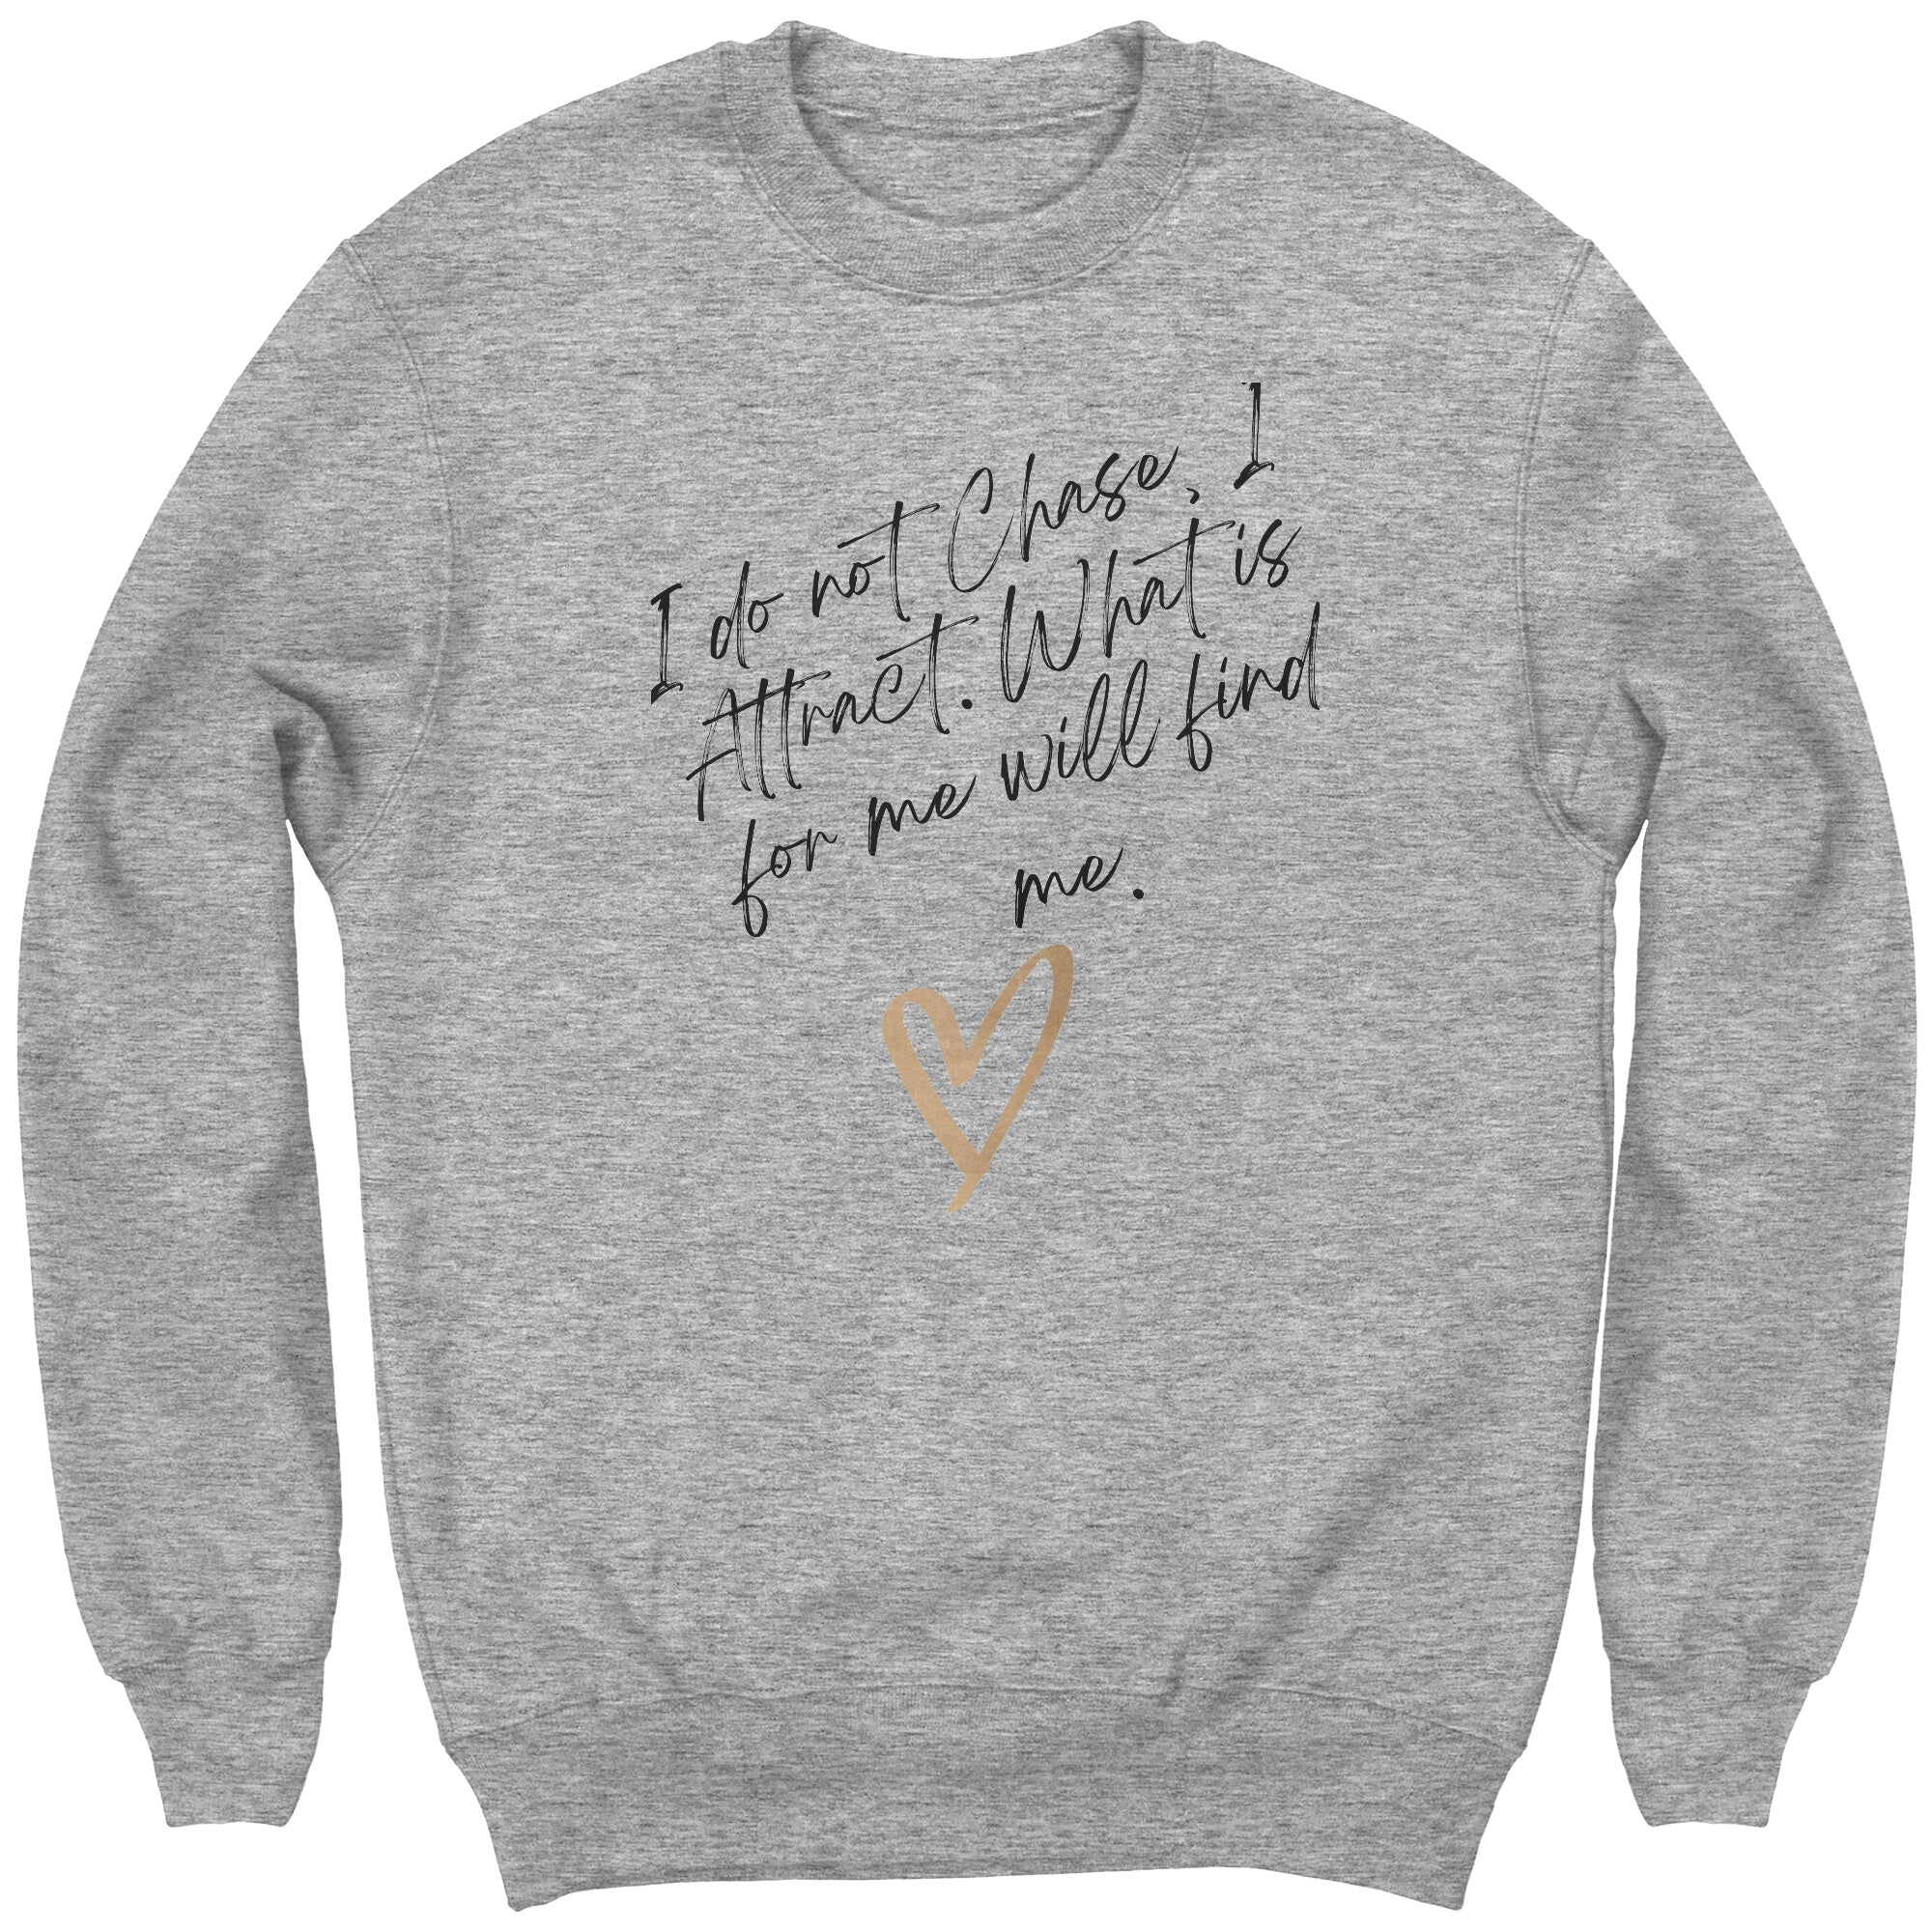 What is for me will find me Sweatshirt